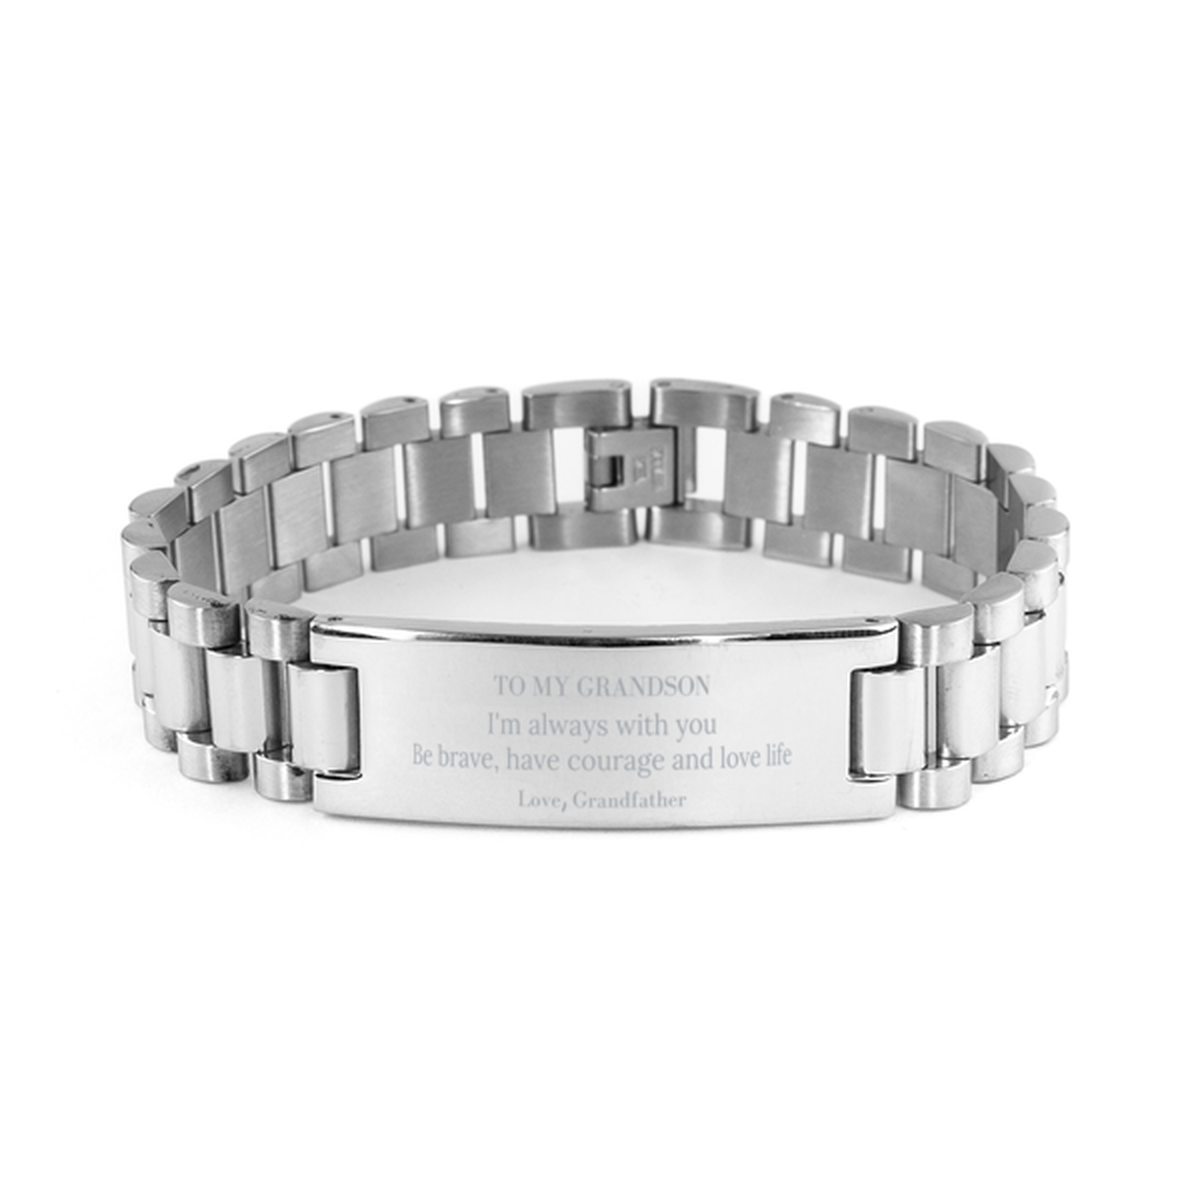 To My Grandson Gifts from Grandfather, Unique Ladder Stainless Steel Bracelet Inspirational Christmas Birthday Graduation Gifts for Grandson I'm always with you. Be brave, have courage and love life. Love, Grandfather